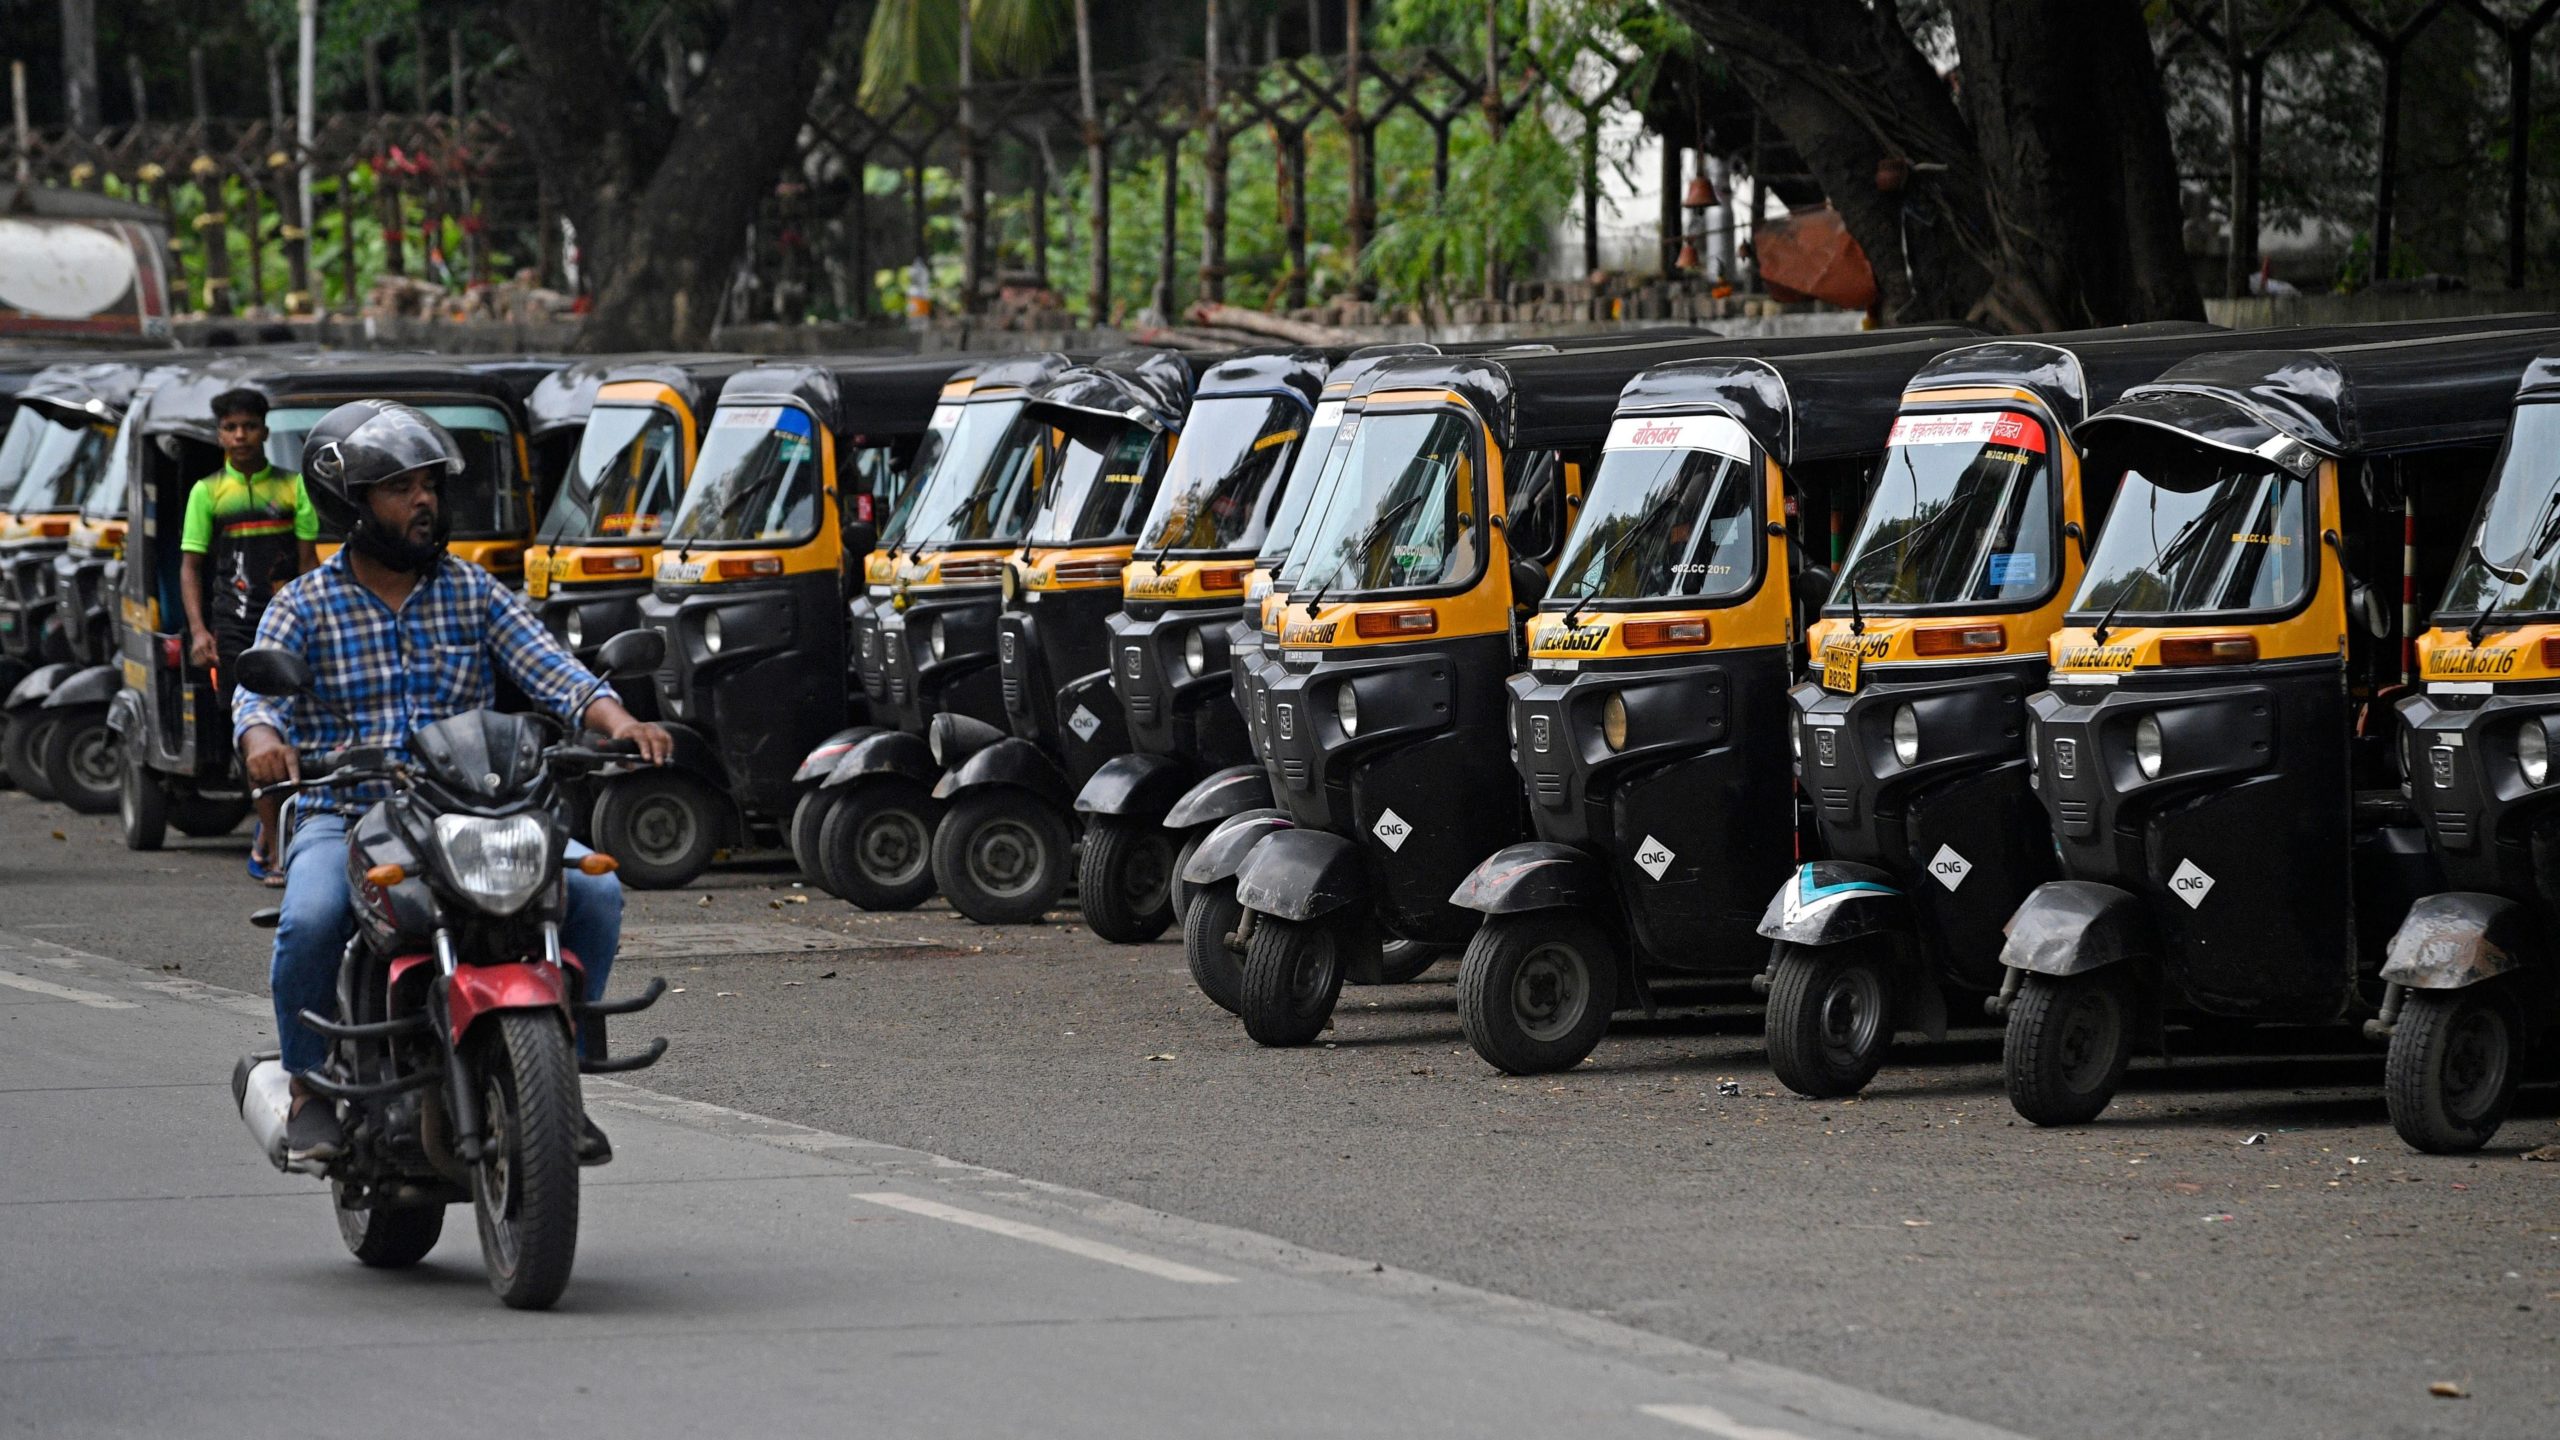 Honda Is Bringing Swappable Batteries And An Exchange Network To Rickshaws In India